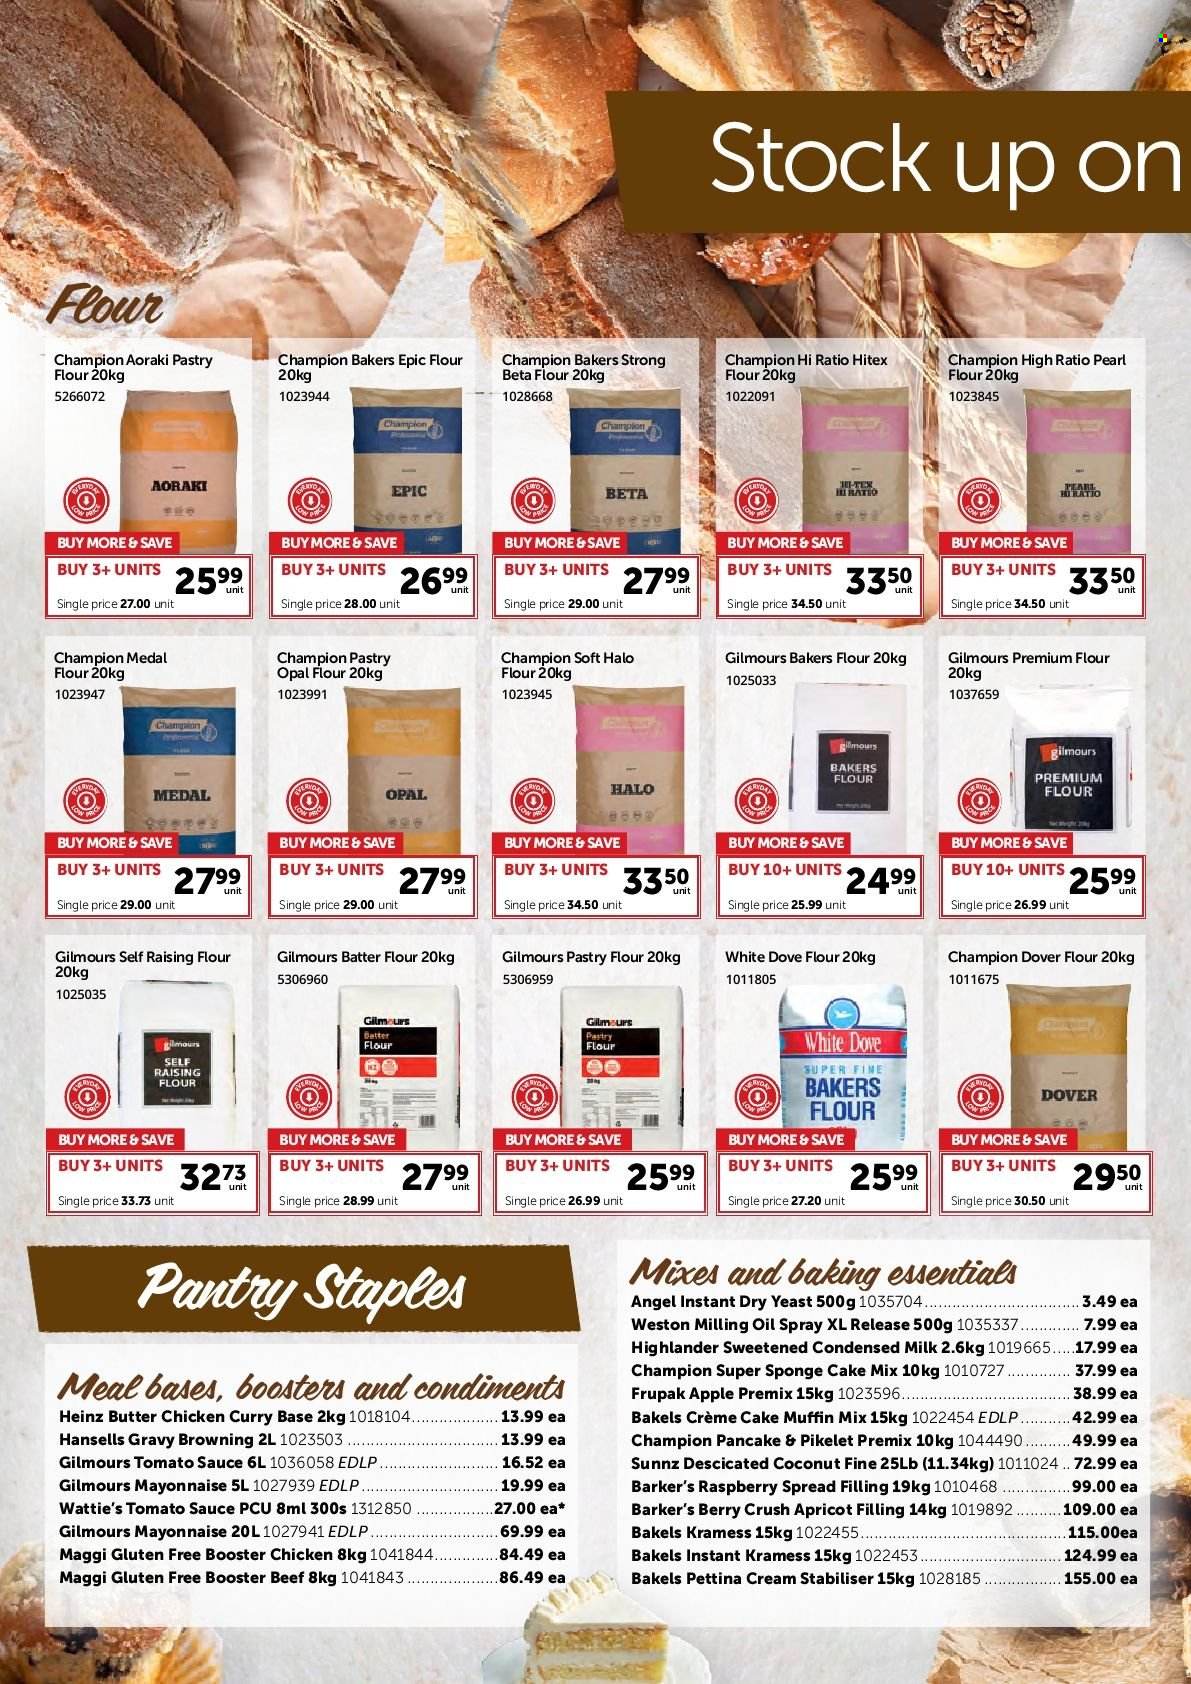 thumbnail - Gilmours mailer - 30.01.2023 - 26.02.2023 - Sales products - sponge cake, cream pie, cake mix, muffin mix, coconut, sauce, pancakes, Wattie's, milk, condensed milk, yeast, mayonnaise, Dove, flour, Maggi, dry yeast, tomato sauce, Heinz, oil. Page 1.